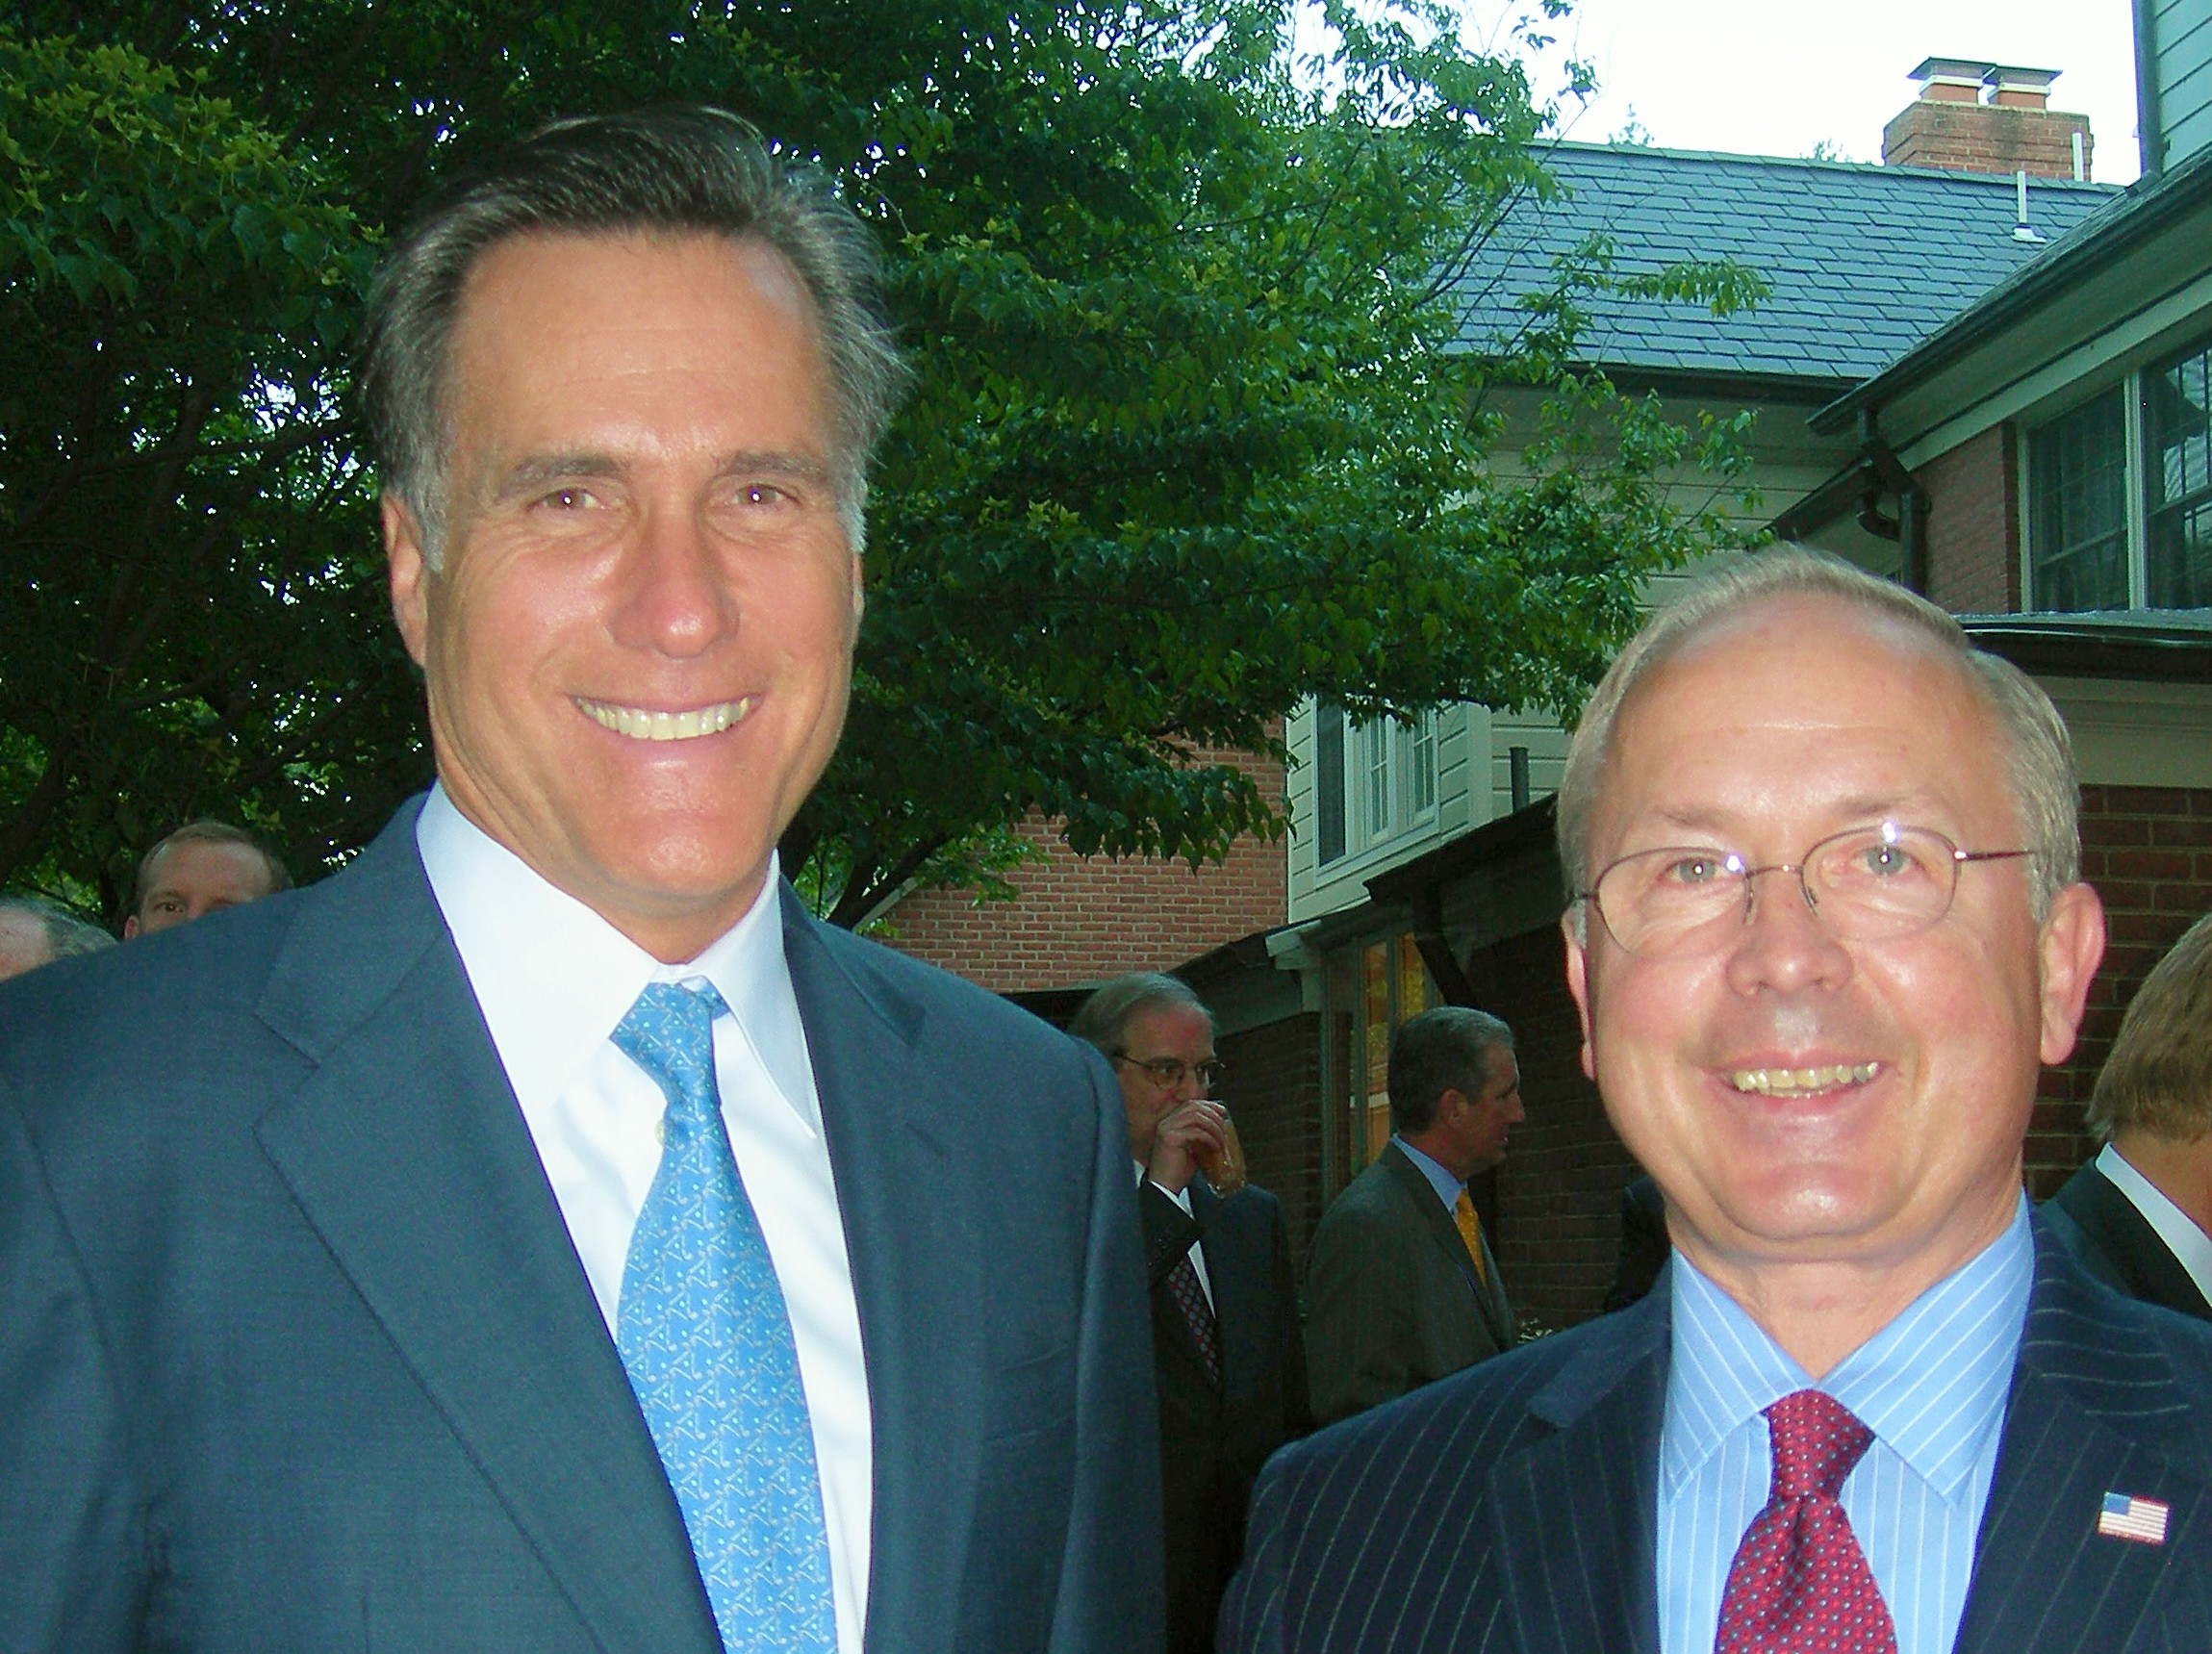 Kent Hoffman with Republican Presidential Candidate Mitt Romney in 2007.